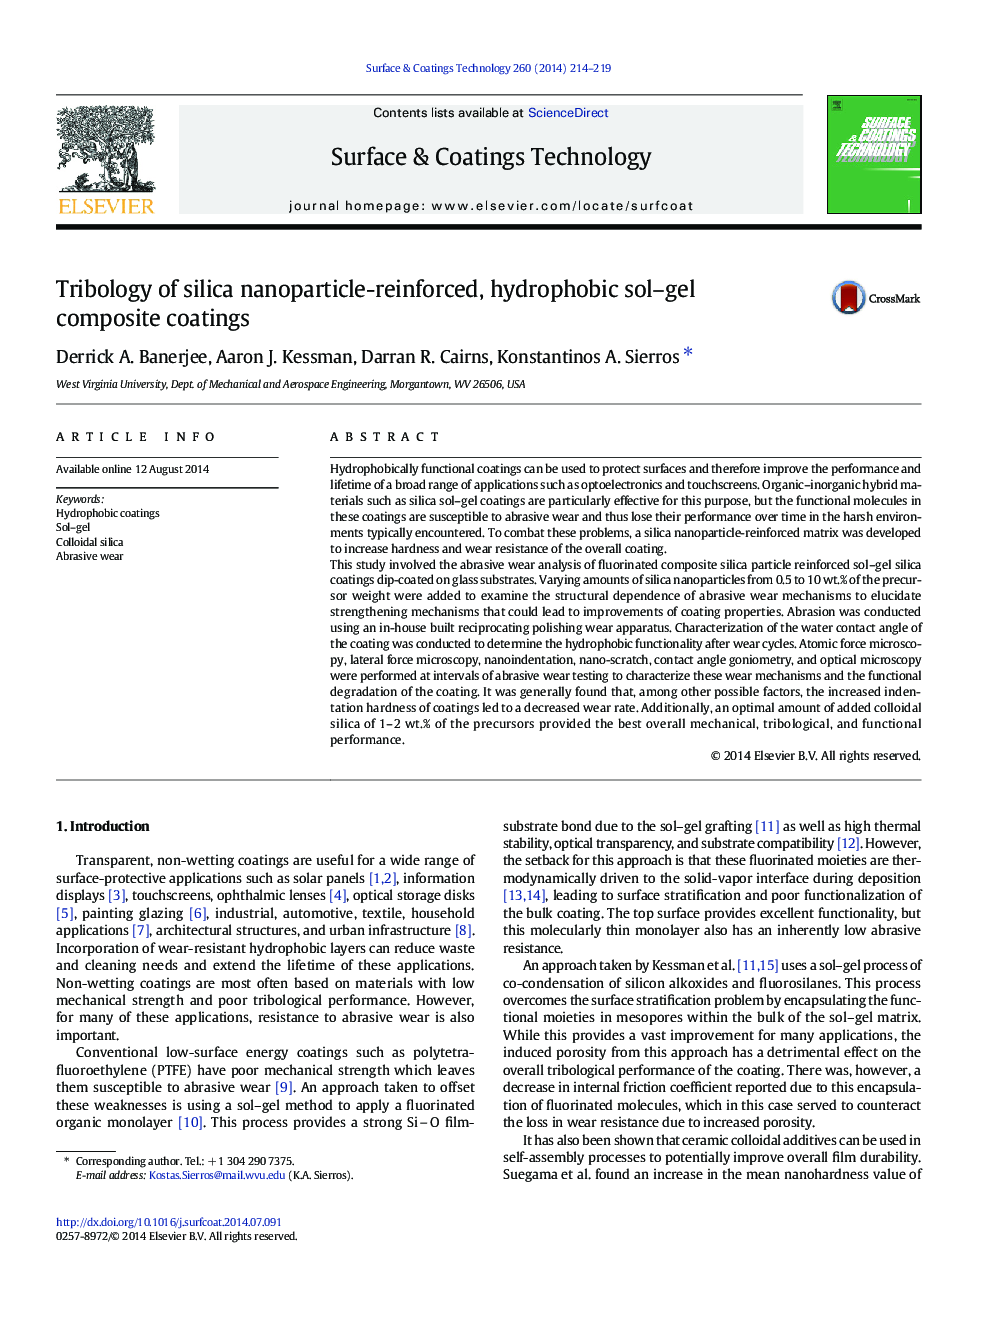 Tribology of silica nanoparticle-reinforced, hydrophobic sol-gel composite coatings